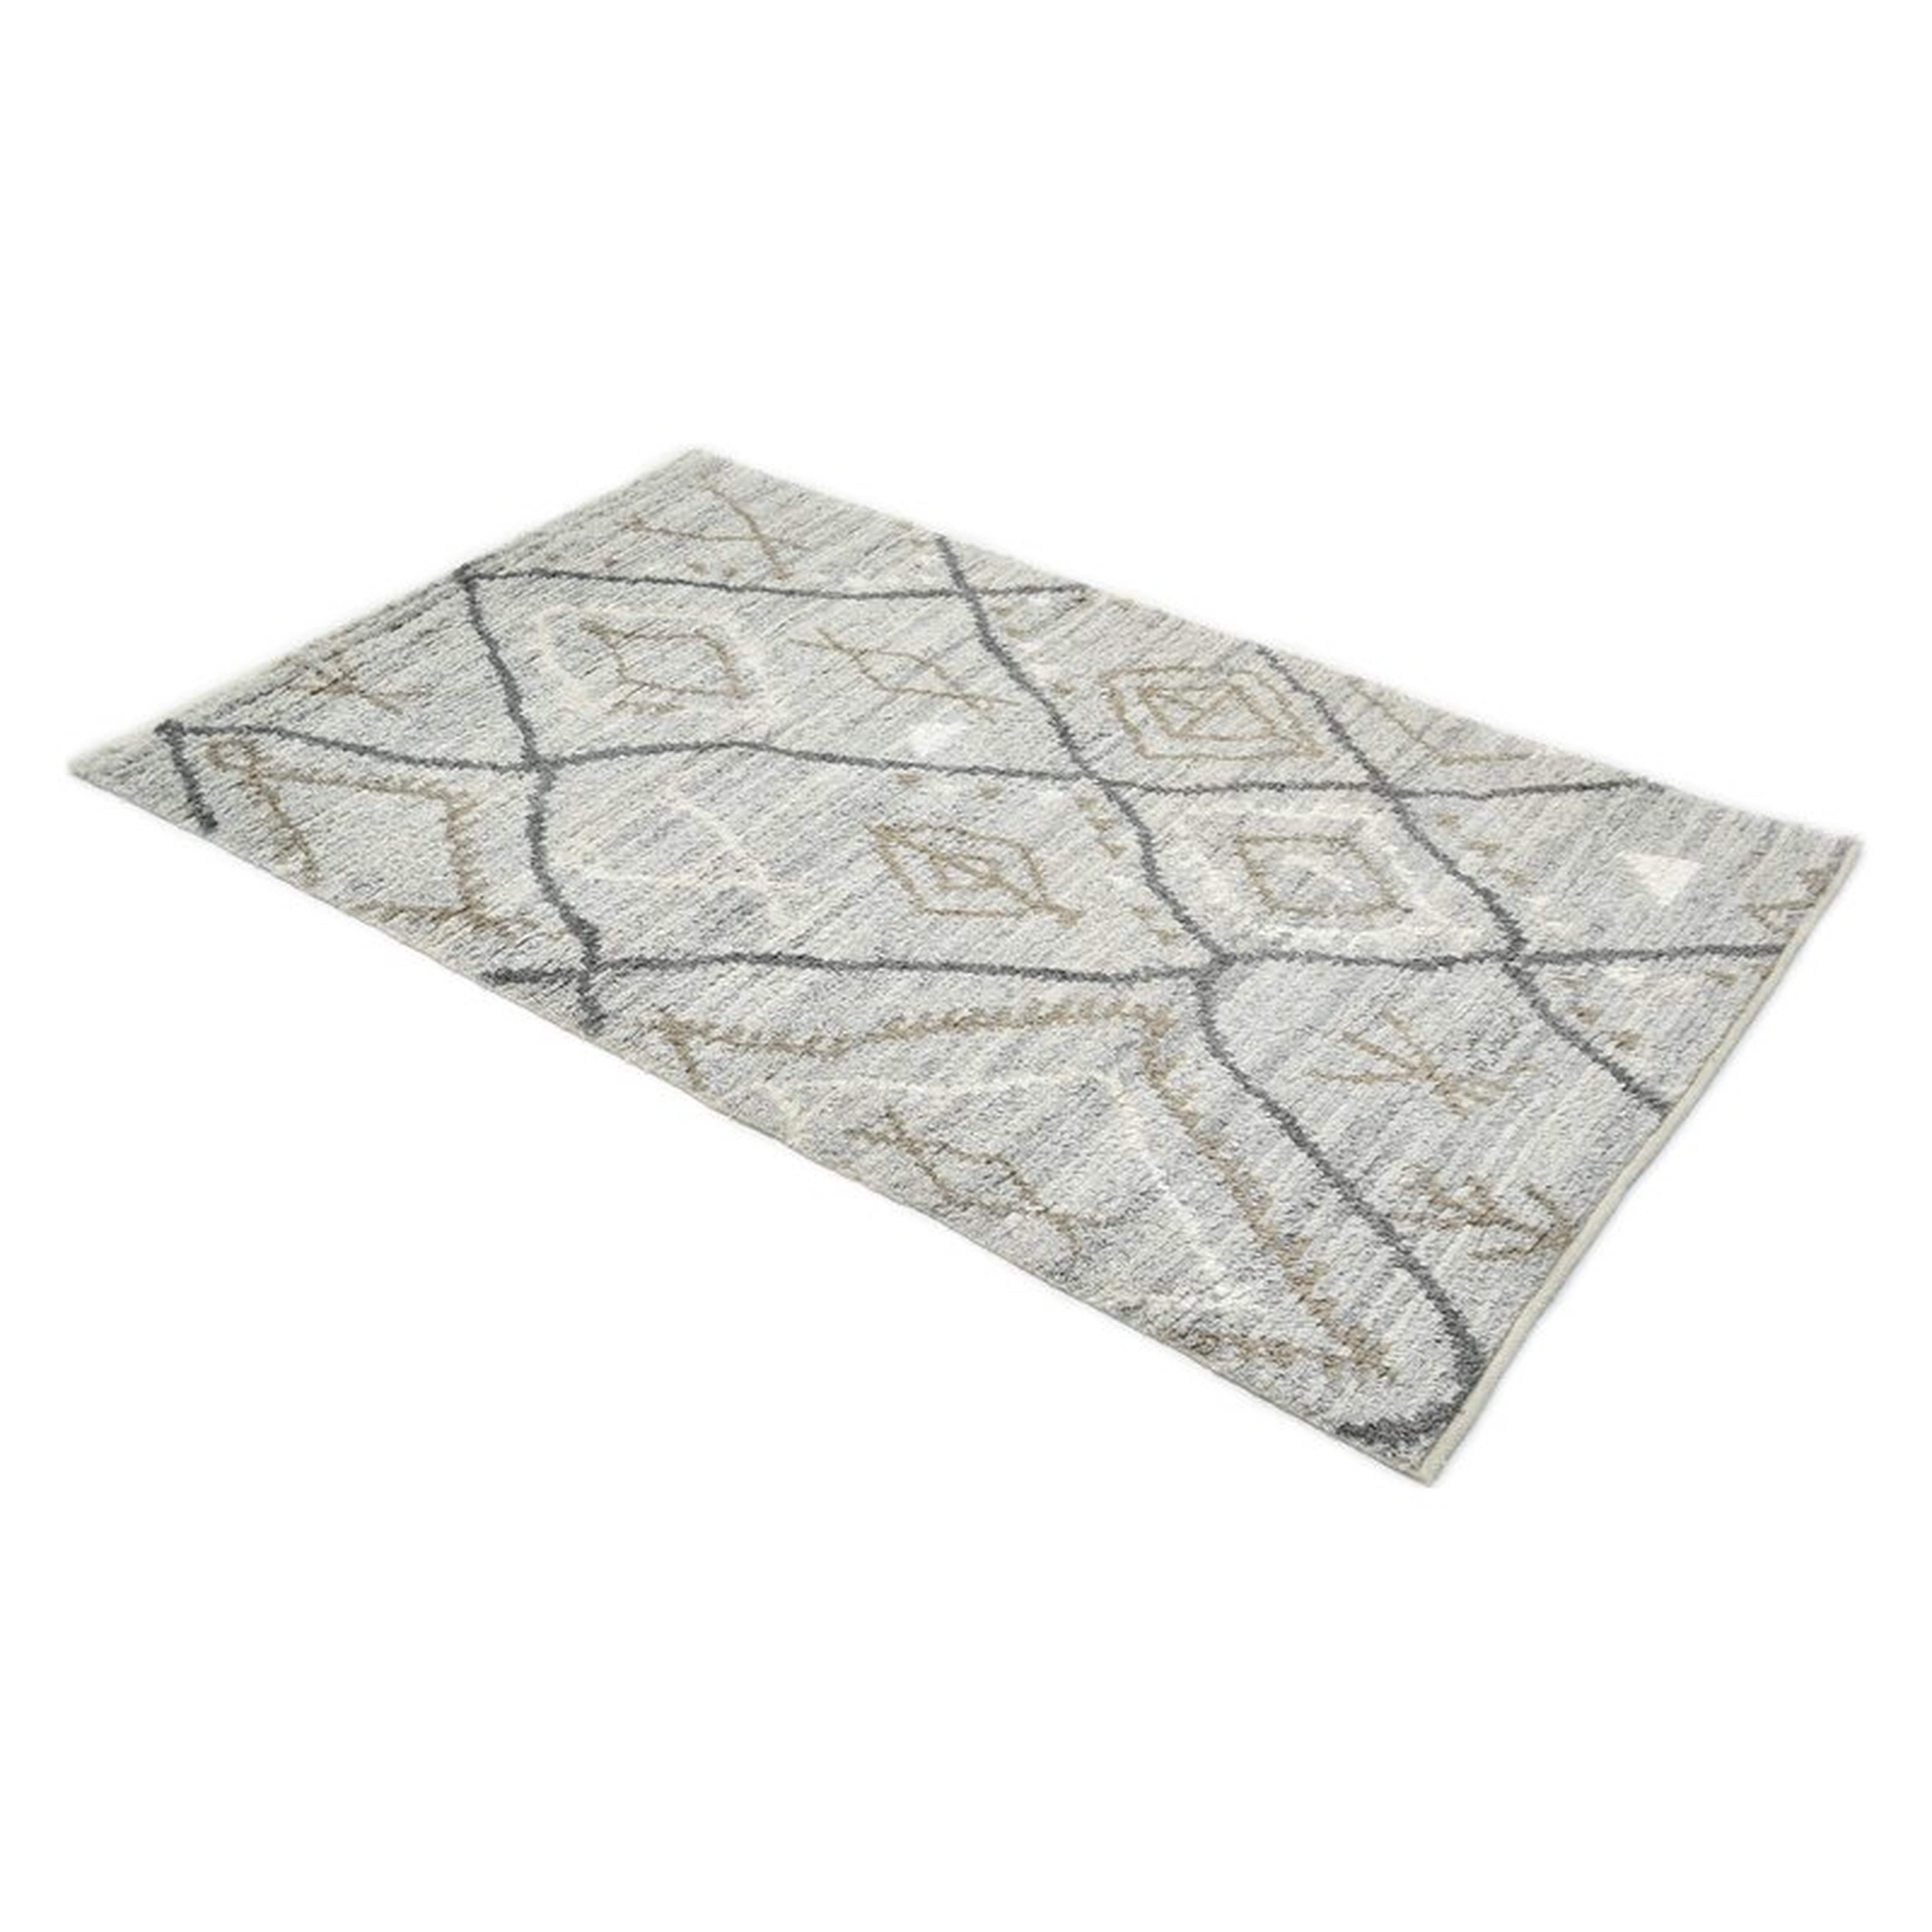 Solo Rugs Clover Abstract Hand Knotted Gray/Brown/Black Area Rug Rug Size: Rectangle 8' x 10' - Perigold